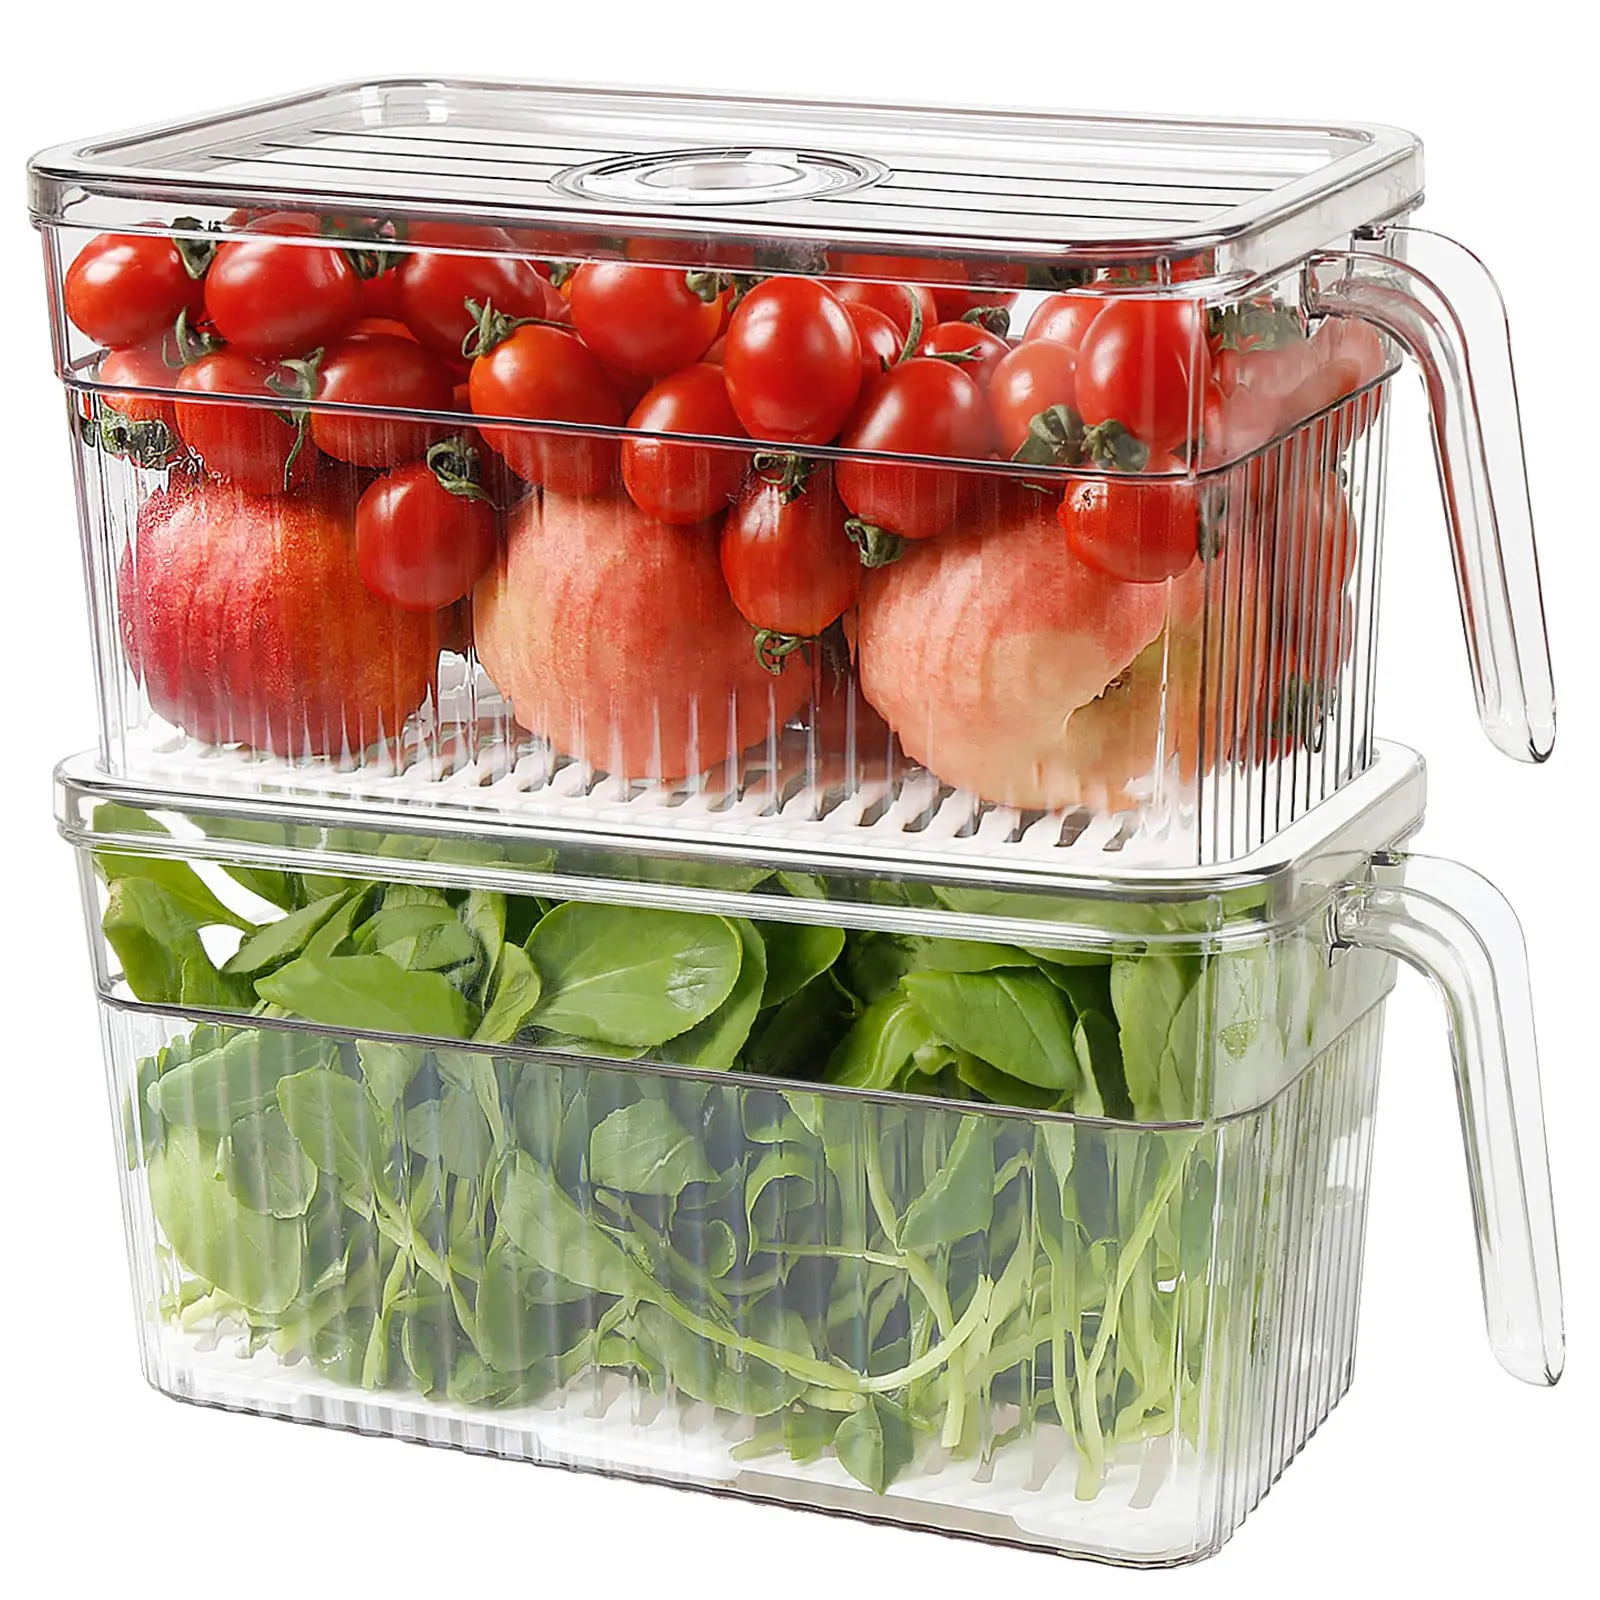 https://ae01.alicdn.com/kf/Sb6af00aca68a468d8b8b40a53b80e1182/Clear-Stackable-Food-Storage-Container-for-Fridge-Berry-Keeper-Boxes-with-Removable-Drain-Tray-Keep-Fresh.jpg